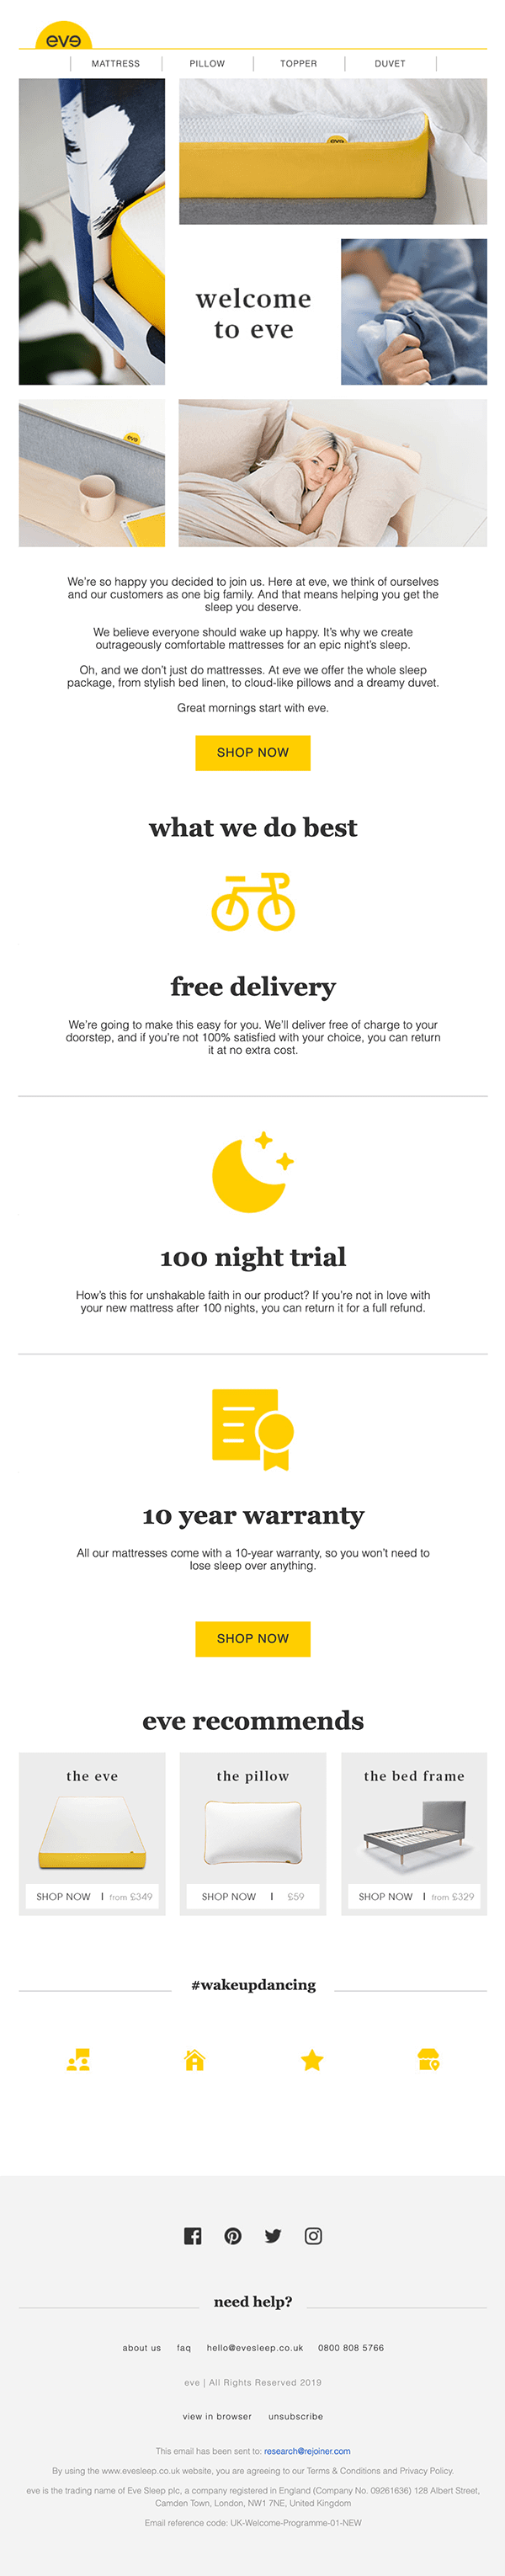 Email from Eve Sleep